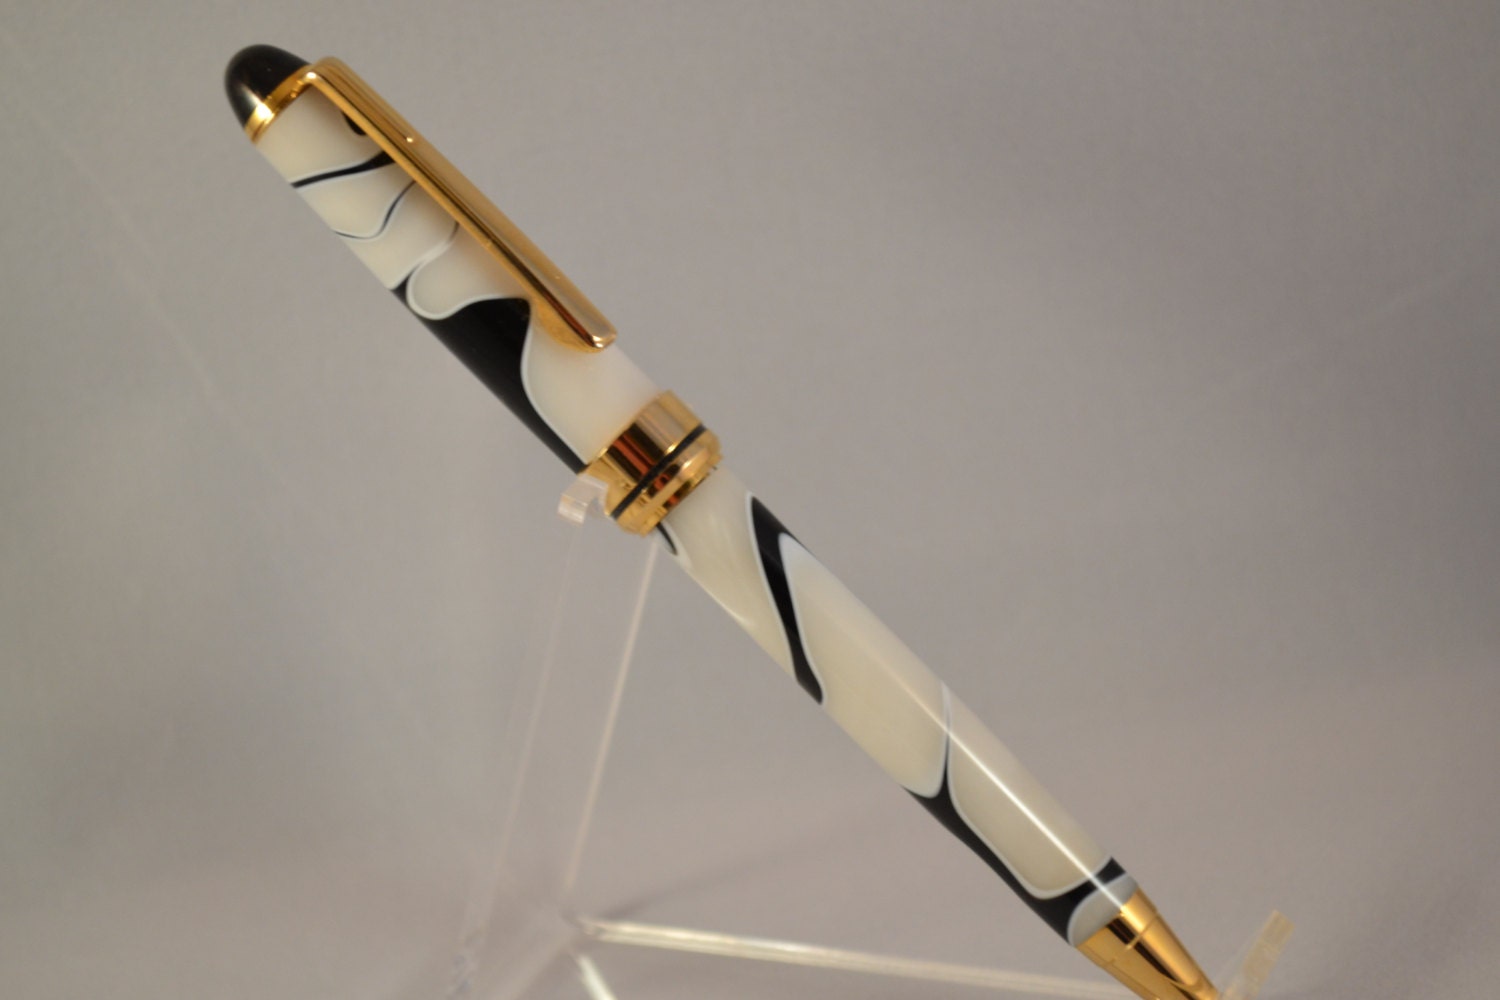 Moonglow Acrylic Pen with 24K Gold Plated Accents â�� Free Shipping to the US - DennisWriteStuff